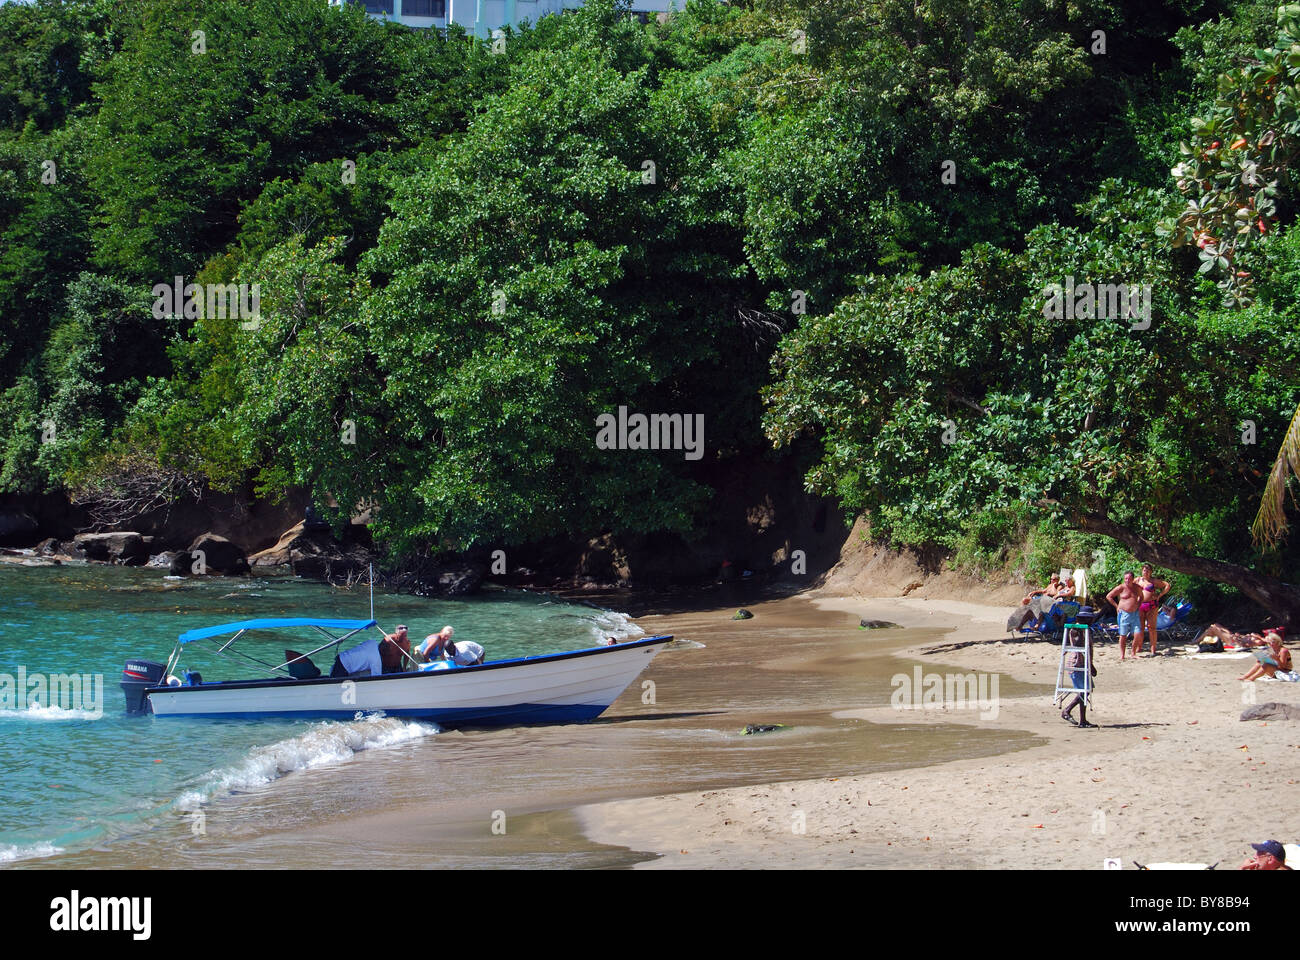 View along the beach, Kingstown, St. Vincent and the Grenadines, Caribbean, West Indies. Stock Photo